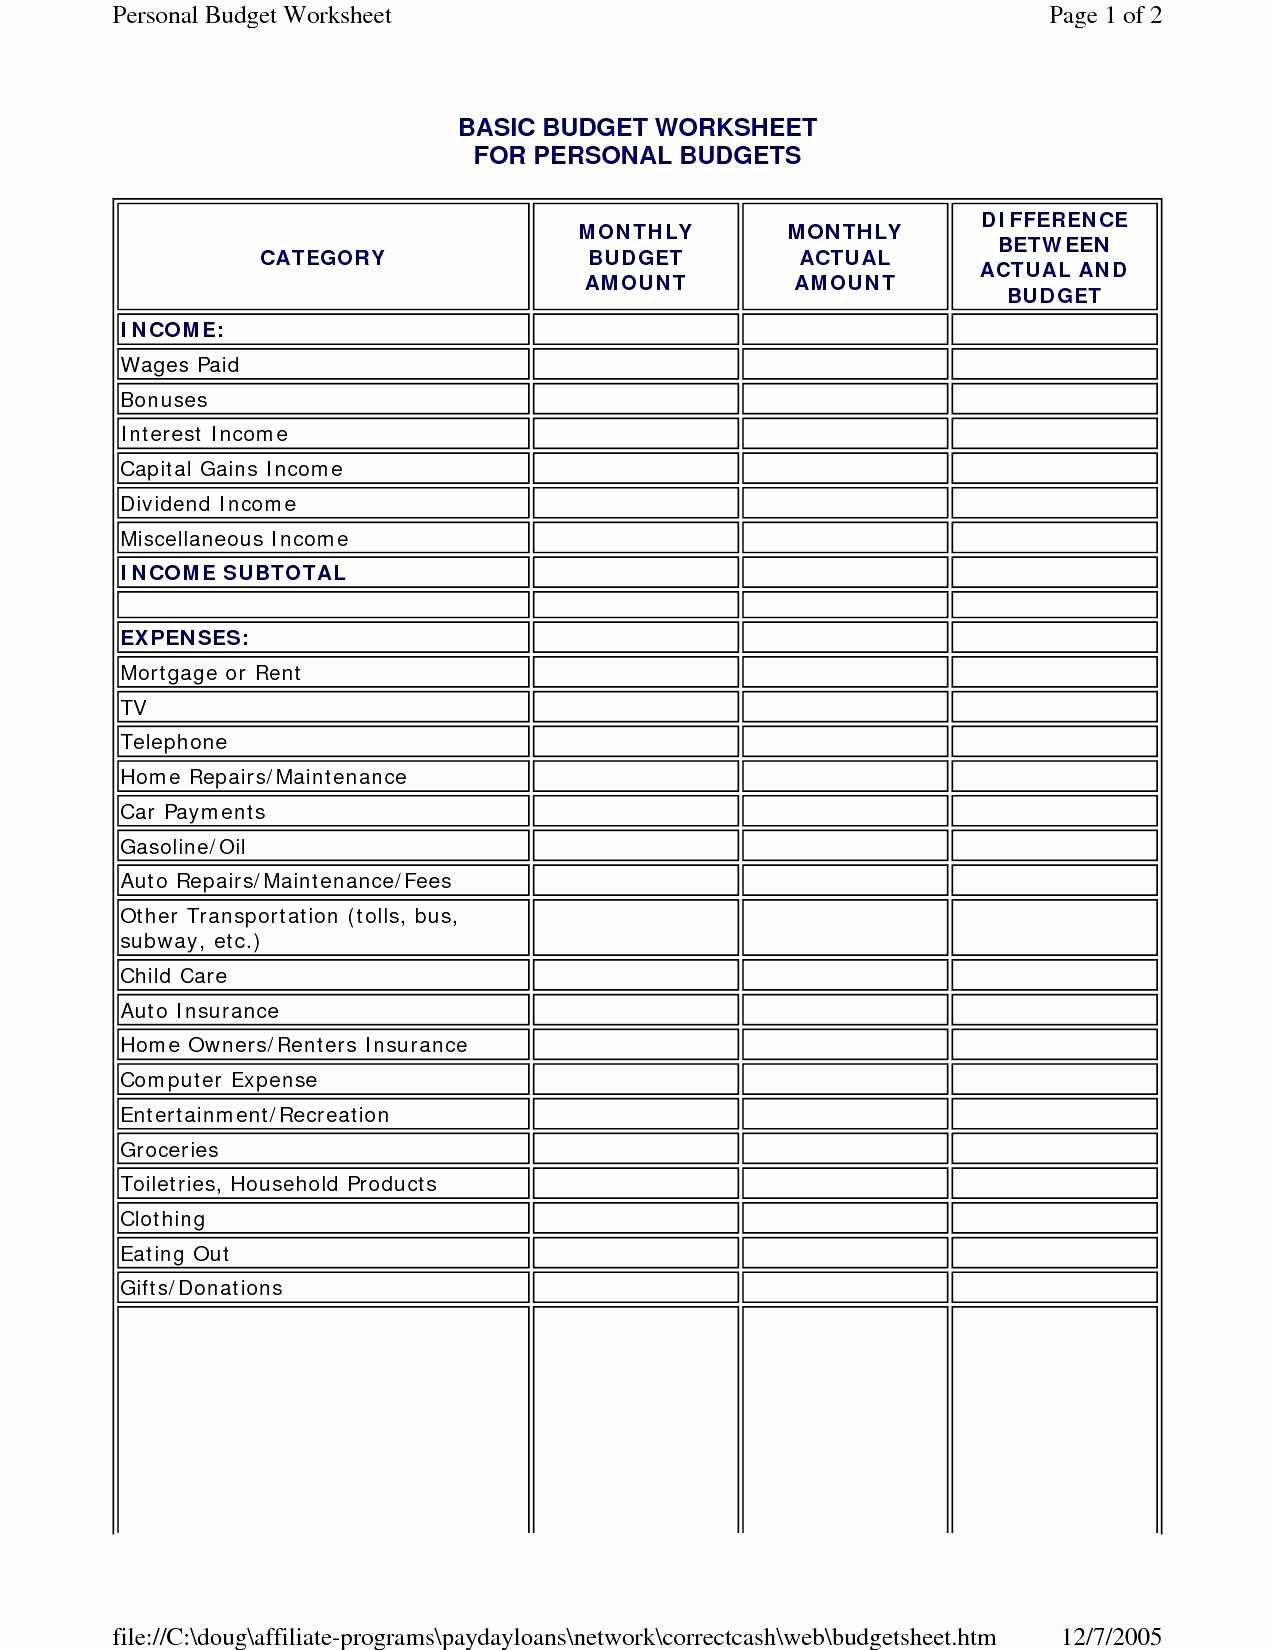 Personal Use Of Company Vehicle Worksheet 2016 or 50 Luxury Dave Ramsey Spreadsheet Template Documents Ideas